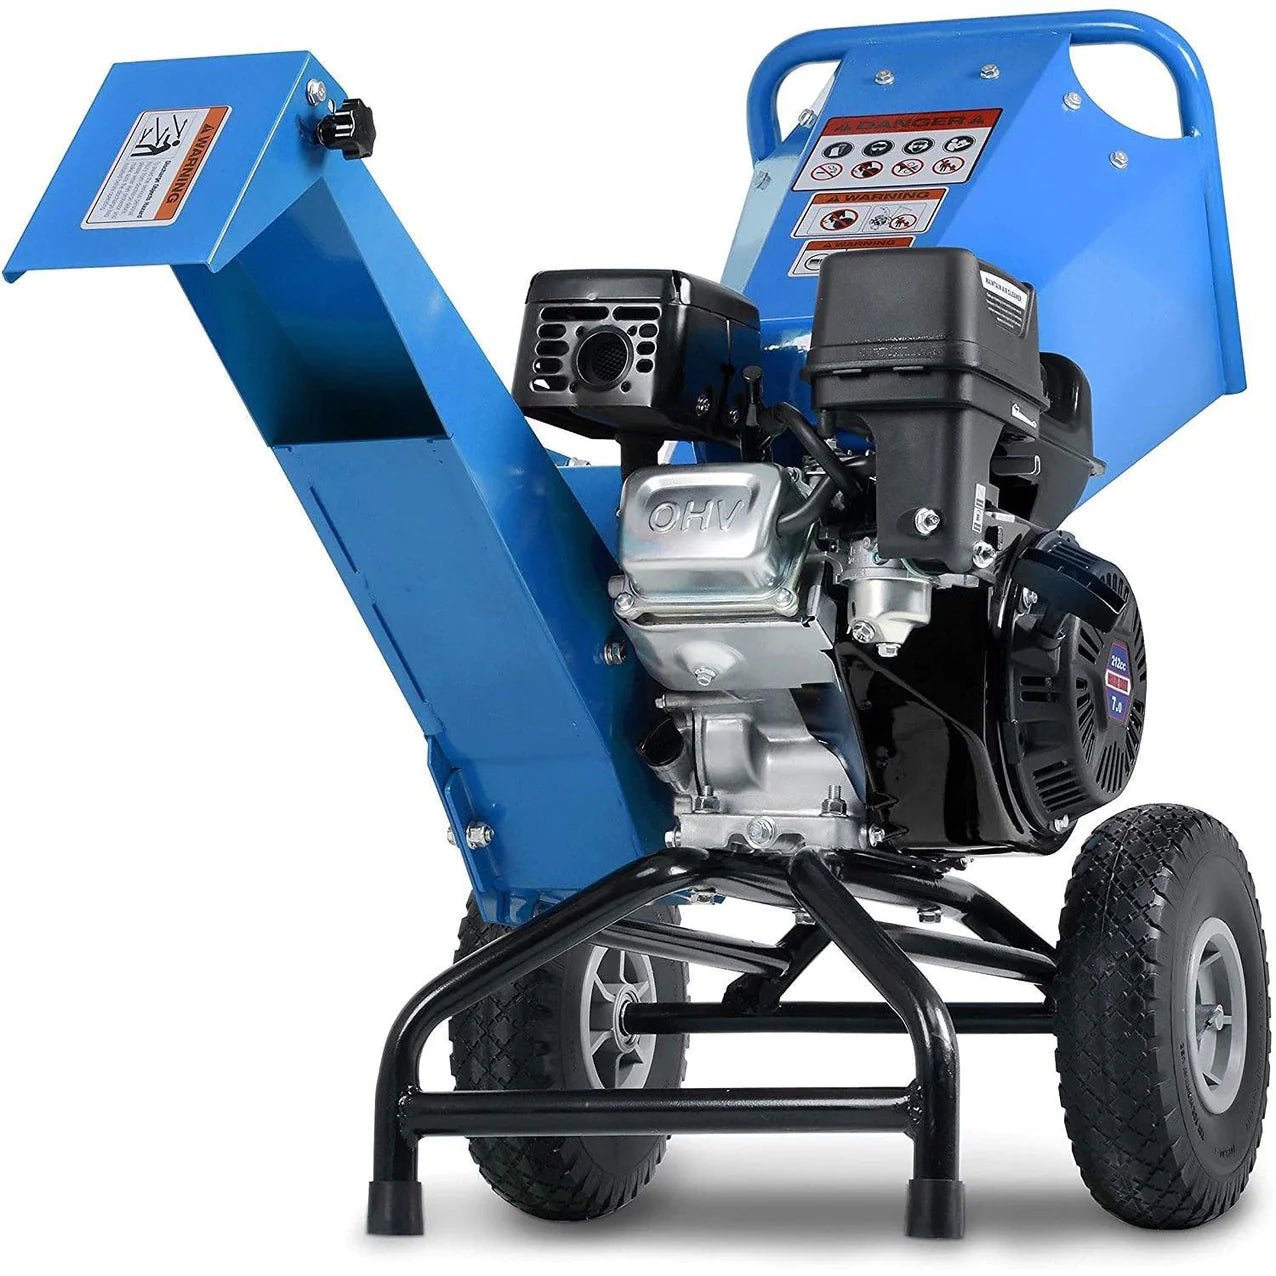 Landworks Compact Wood Chipper - 7HP Gas Engine, Adjustable Exit Chute, 3" Max Branch Diameter (Blue) SKU: GUO067 - Prime Yard Tools